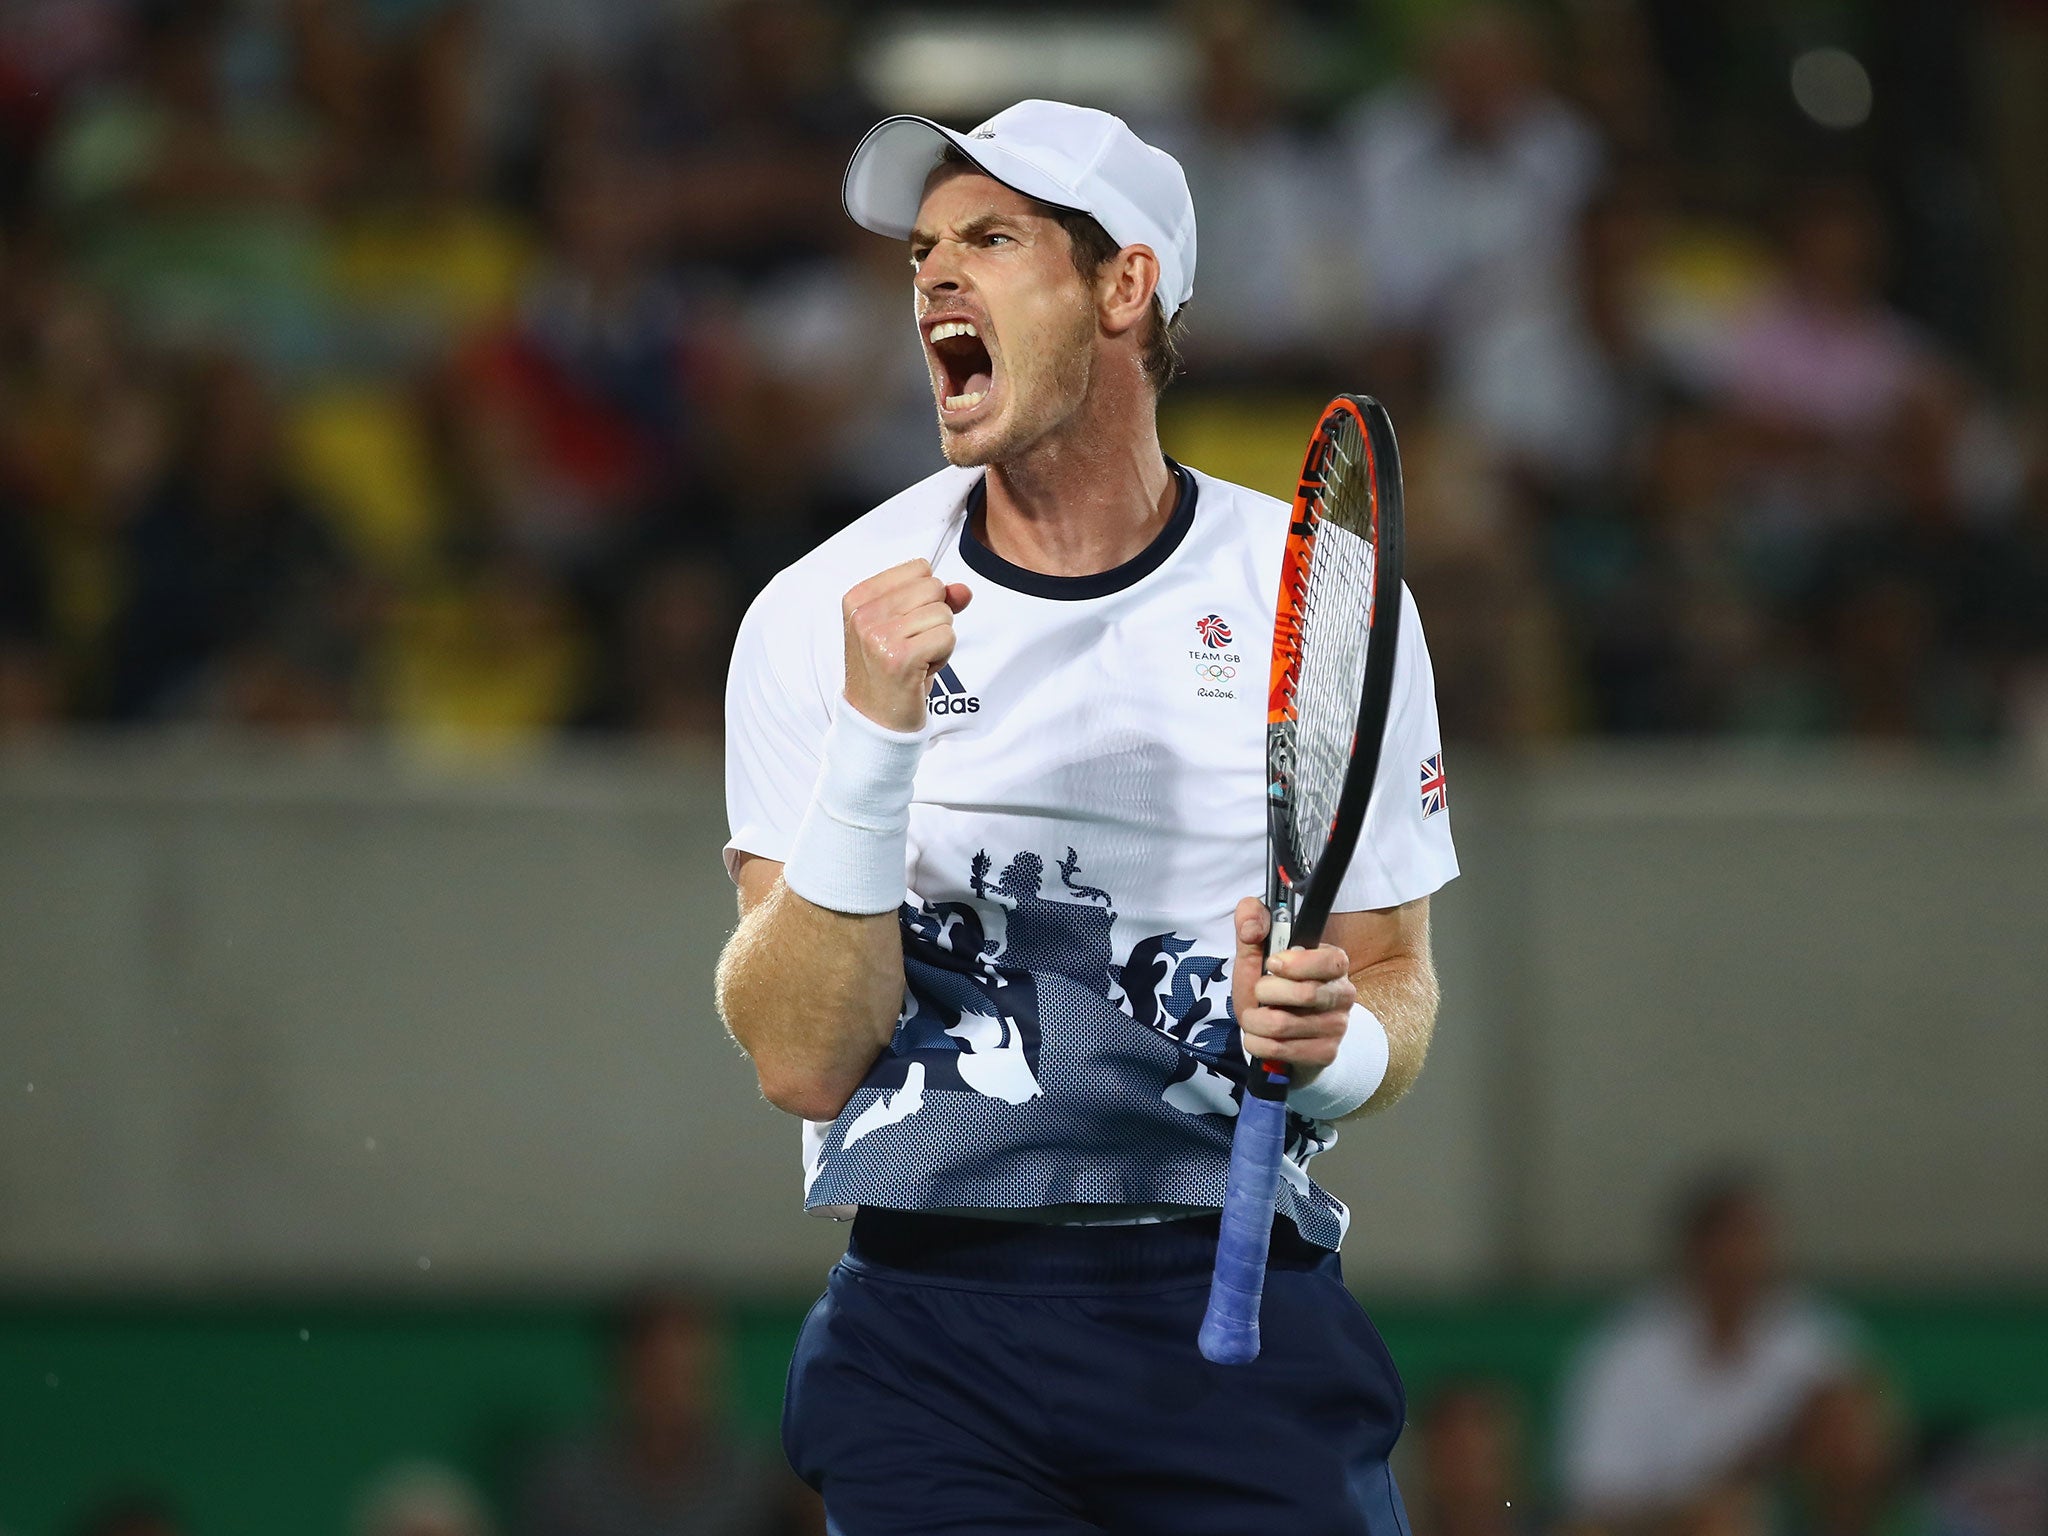 Sir Andy Murray, who received a knighthood in the 2017 New Year Honours list